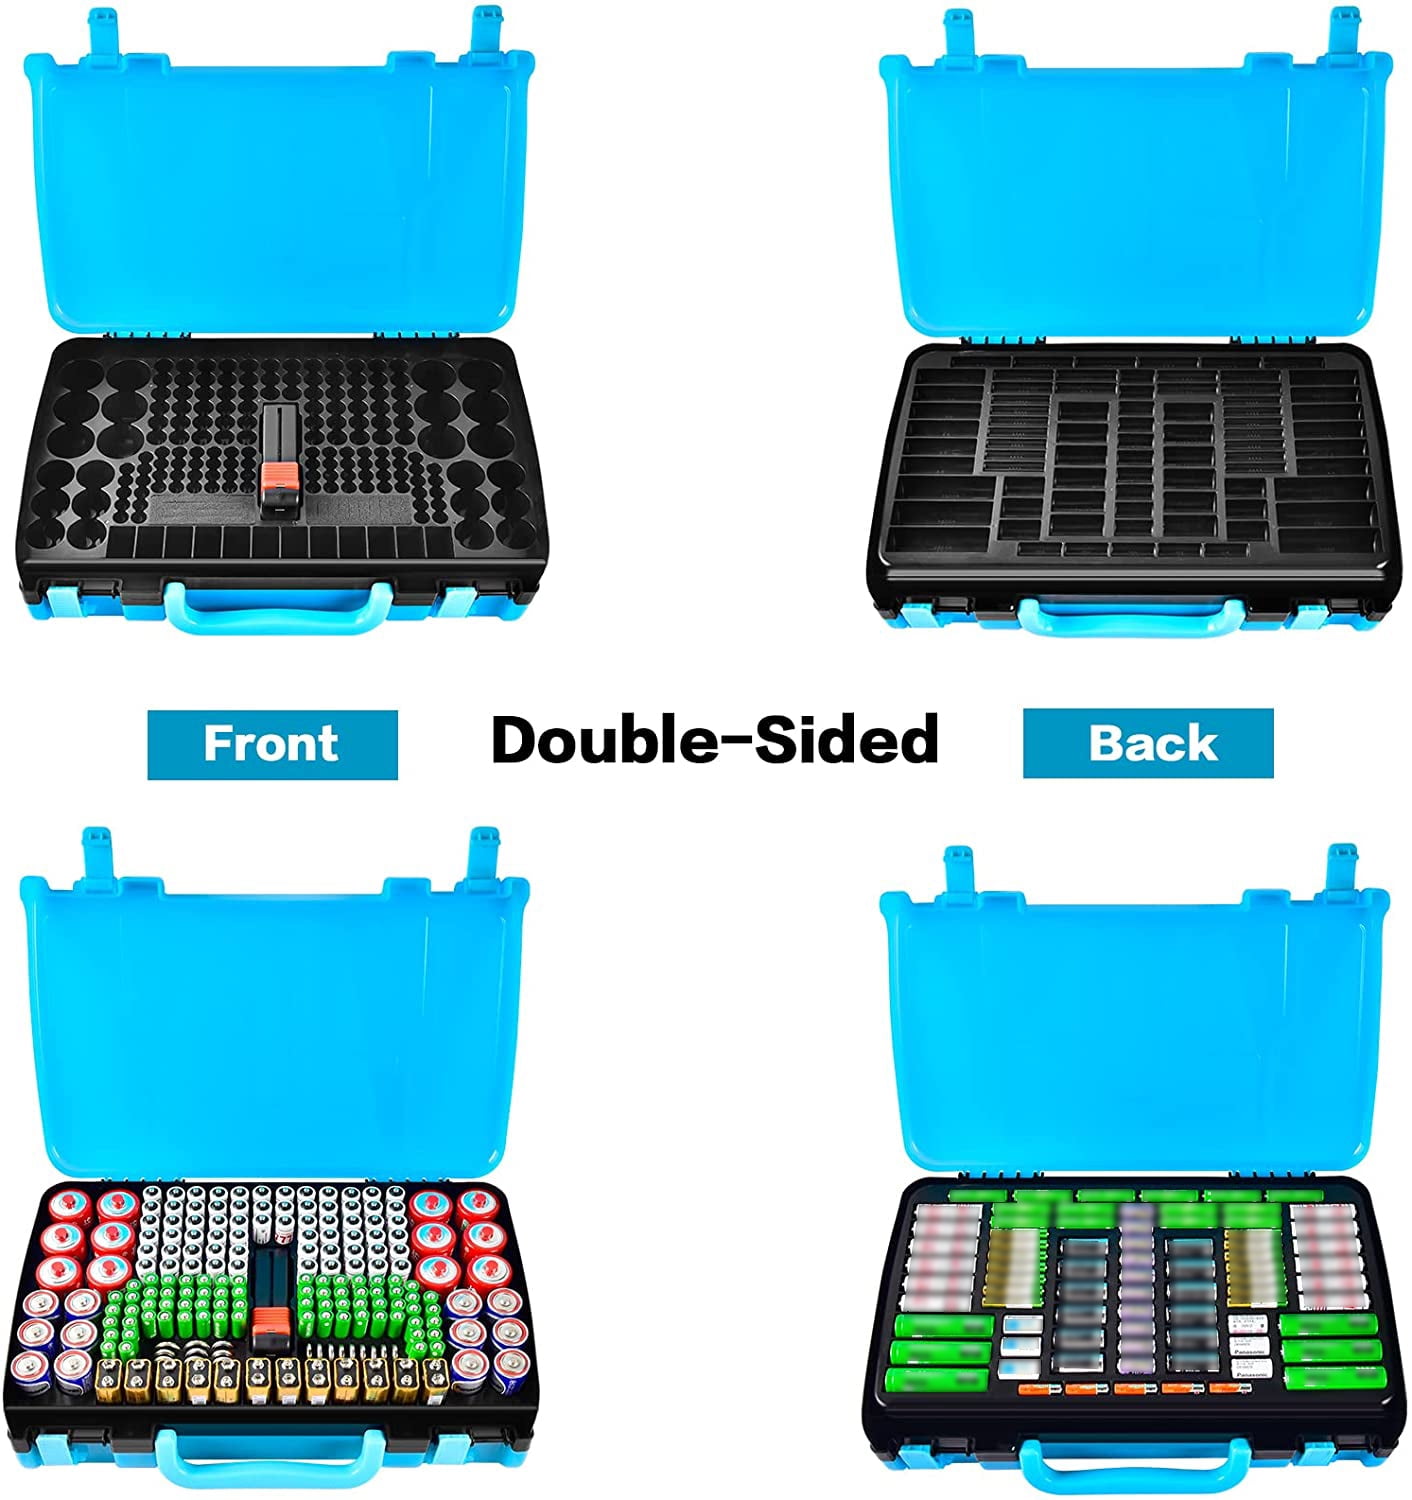  Battery Storage Organizer Case Holder Box with Tester,  Double-Sided Batteries Fits for 269 Caddy Container AA AAA AAAA 3A 4A 9V C  D Lithium 23A 4LR44 CR123A CR1632 CR2032 - Black 